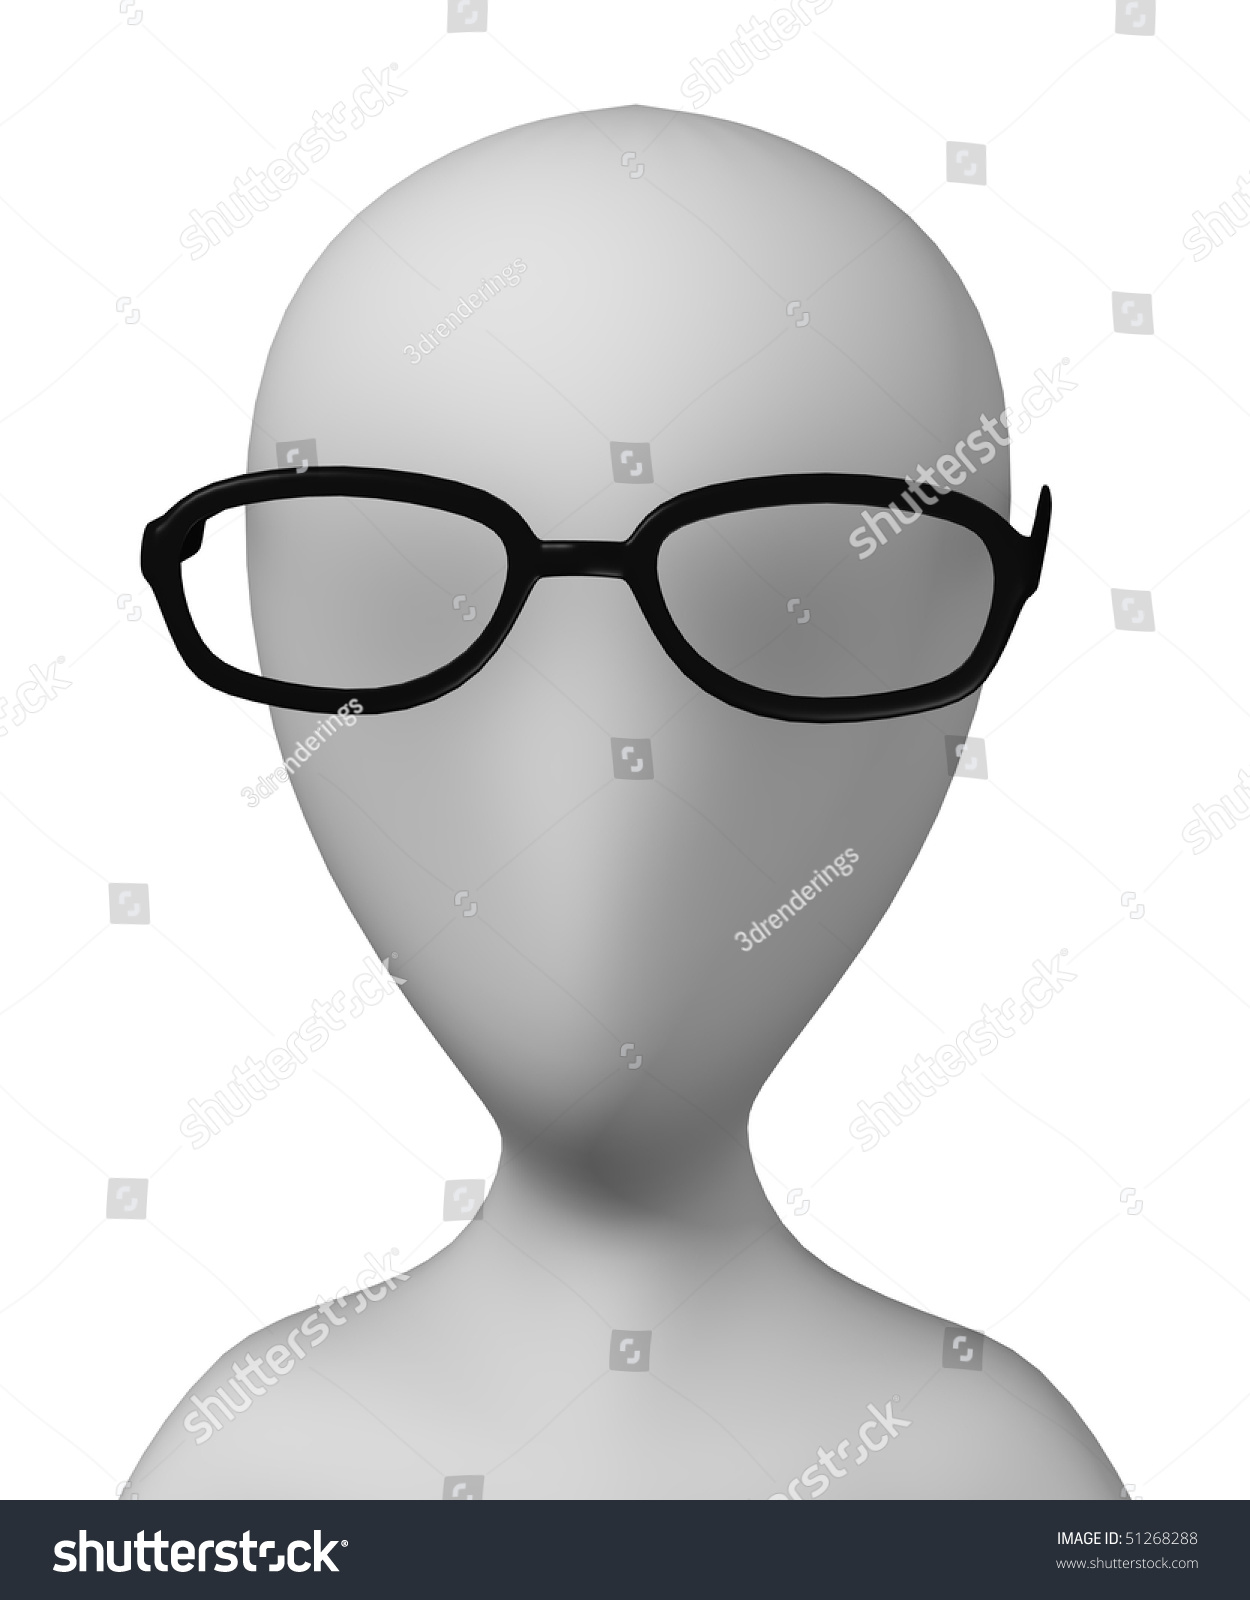 3d Render Of Cartoon Character With Glasses Stock Photo 51268288